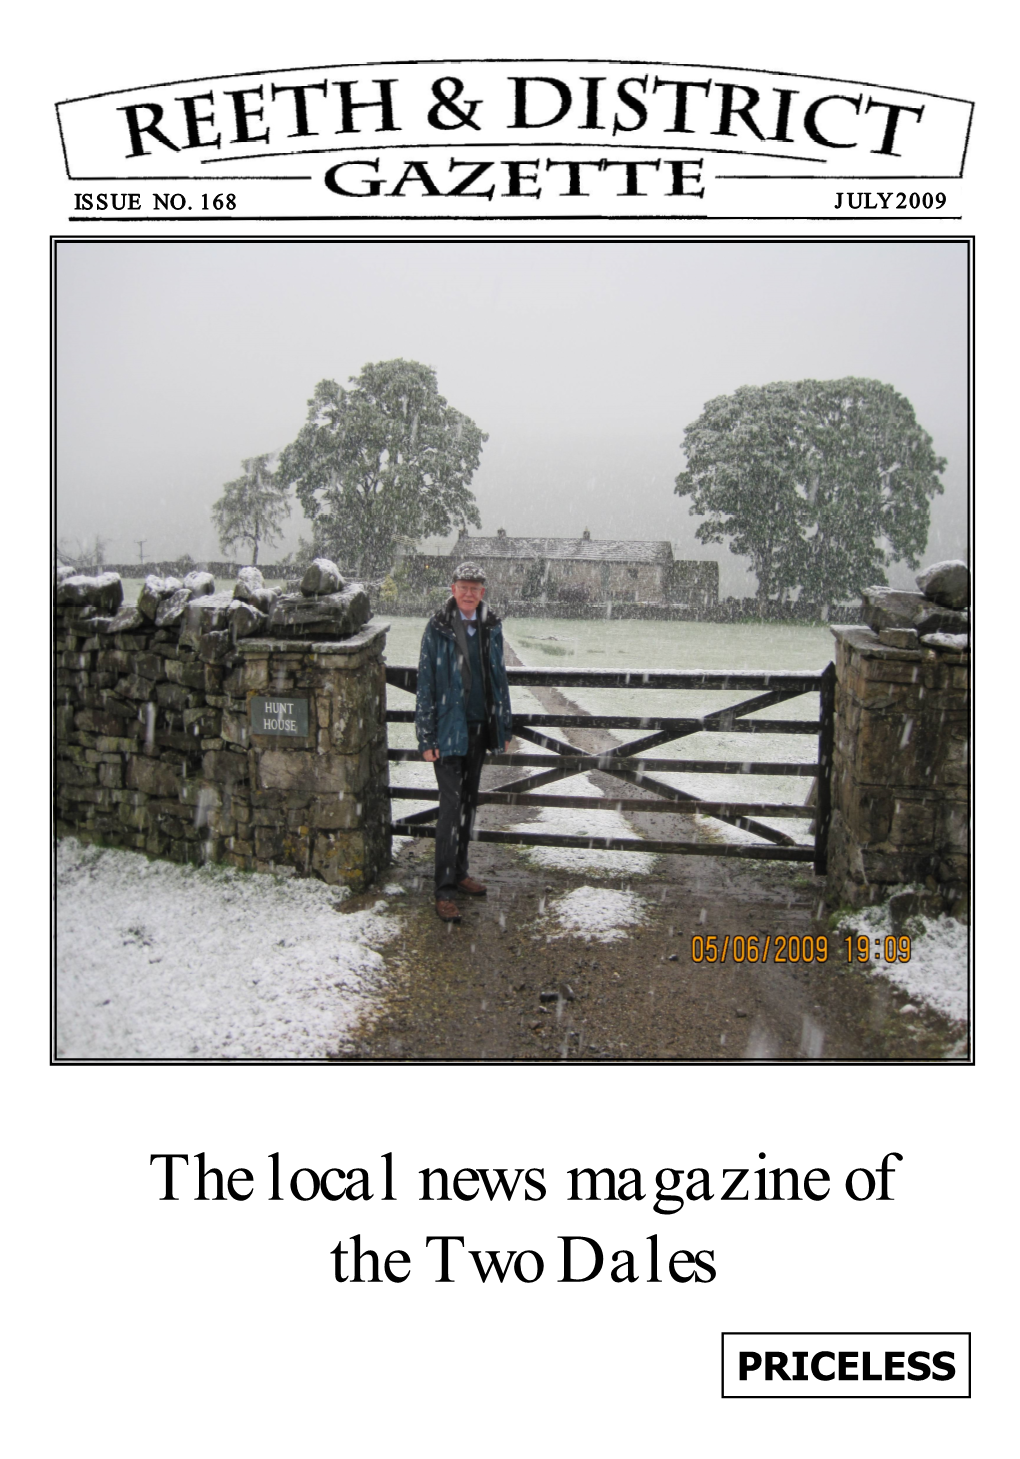 The Local News Magazine of the Two Dales